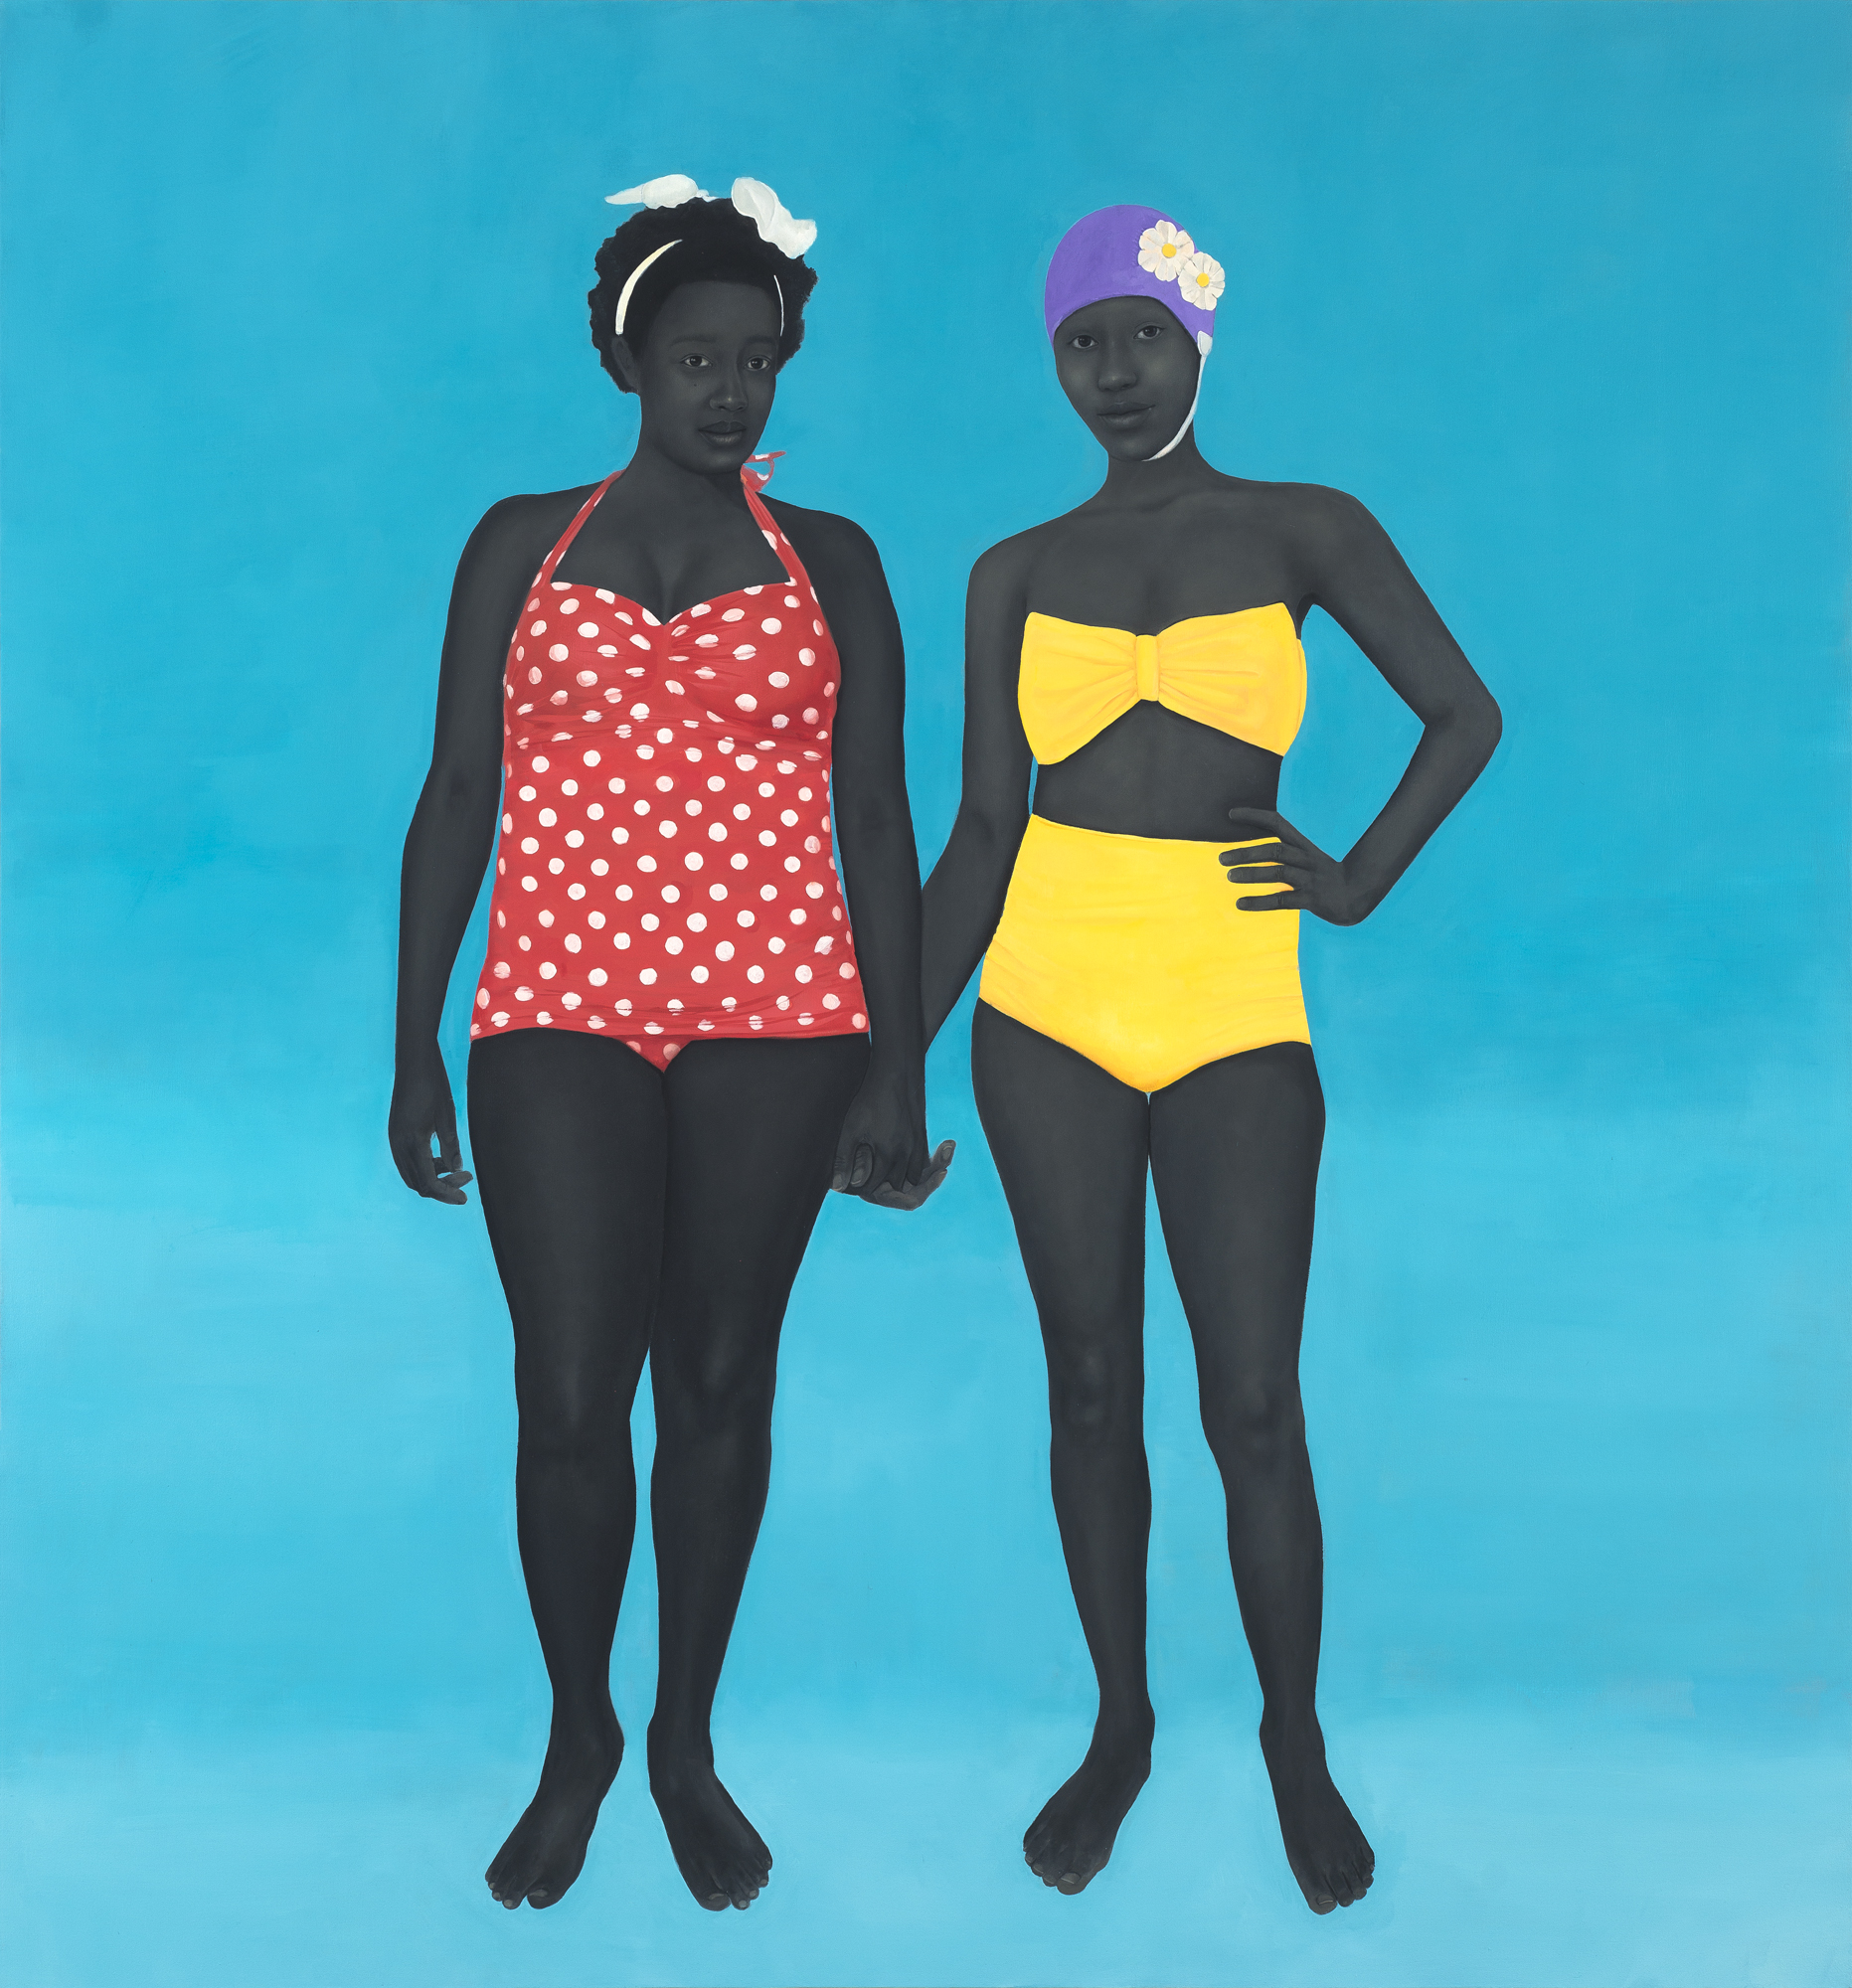 Amy Sherald, The Bathers, 2015. Oil on canvas, 72 x 67 inches. Collection of Pamela K. and William A. Royall, Jr. Courtesy the artist and Monique Meloche Gallery, Chicago